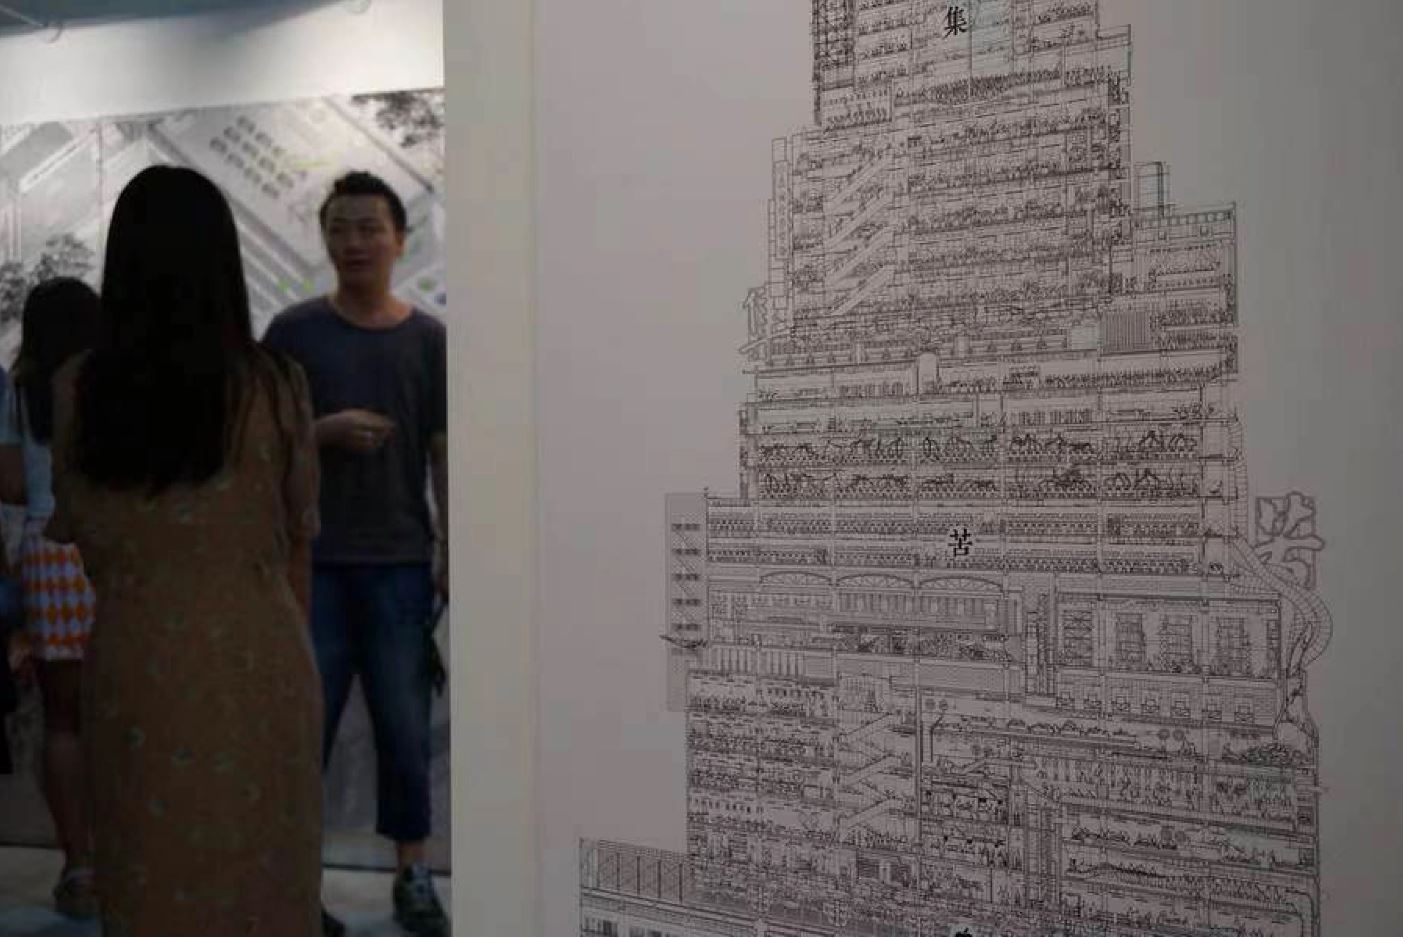 Zigeng Wang's Work “Dukkha Tower" was Invited to Participate in the 2014 “Get It Louder" Exhibition